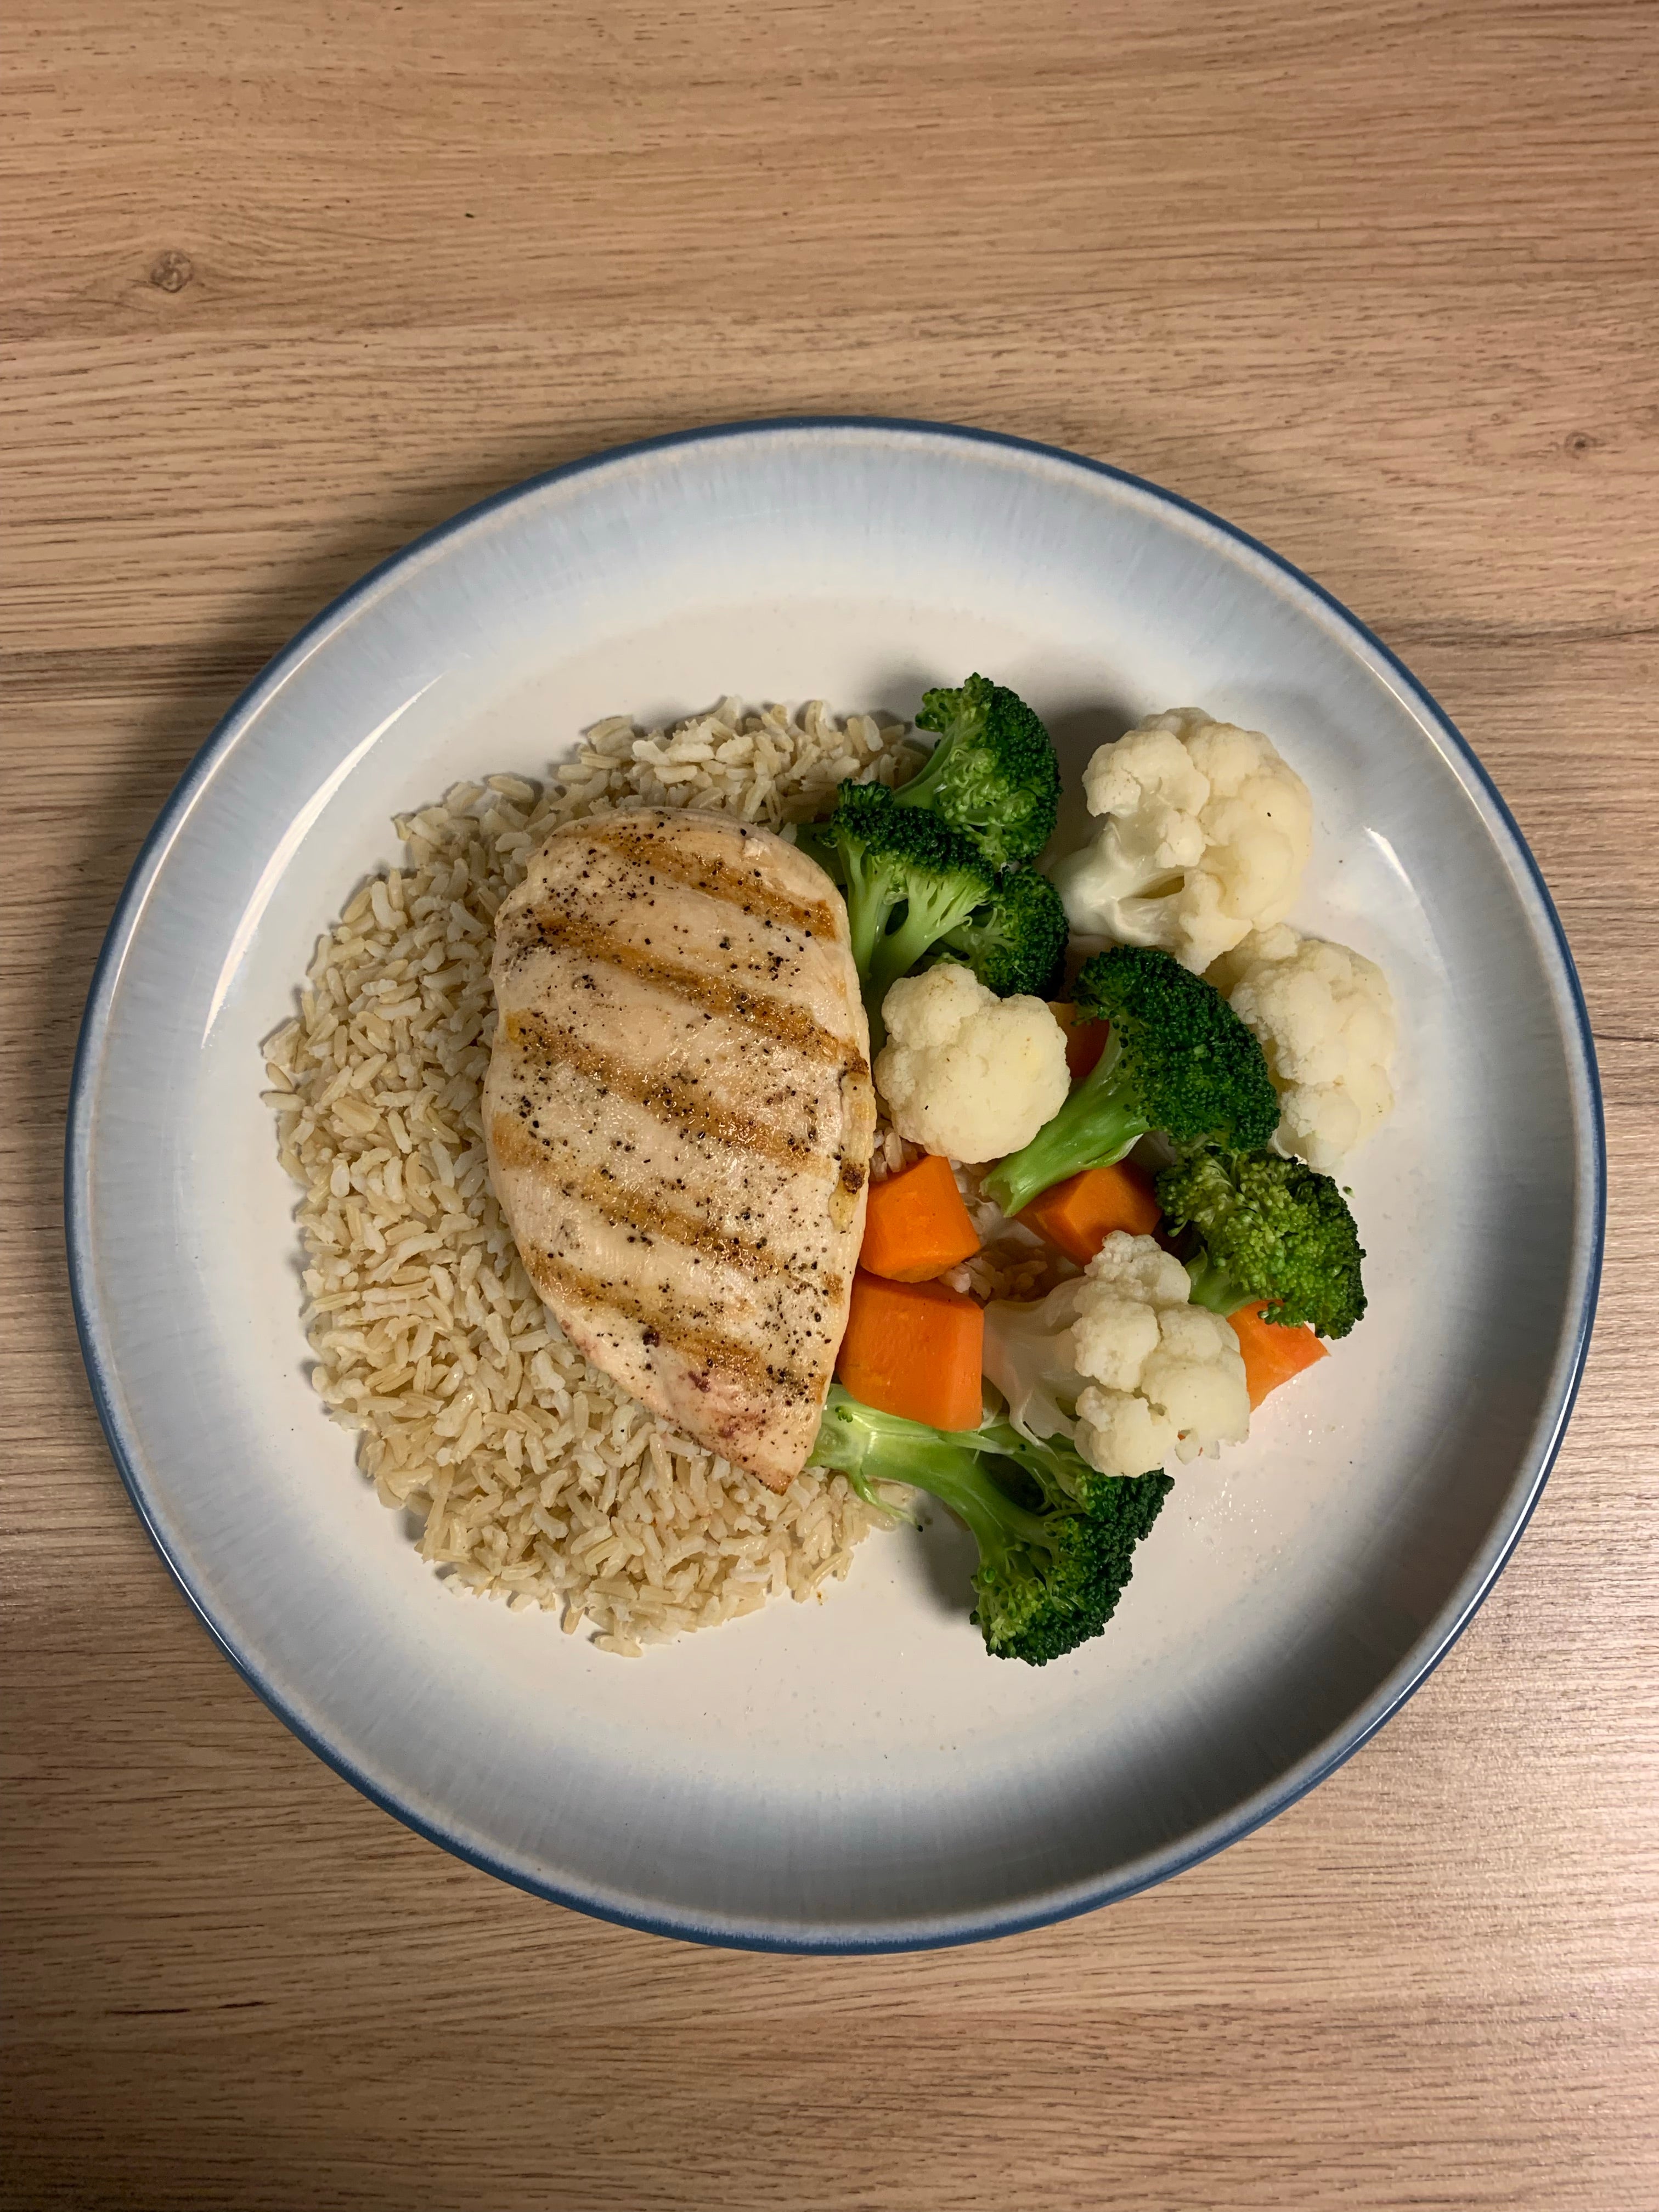 Chicken Breast, Brown Rice, Mixed Vegetables Meal